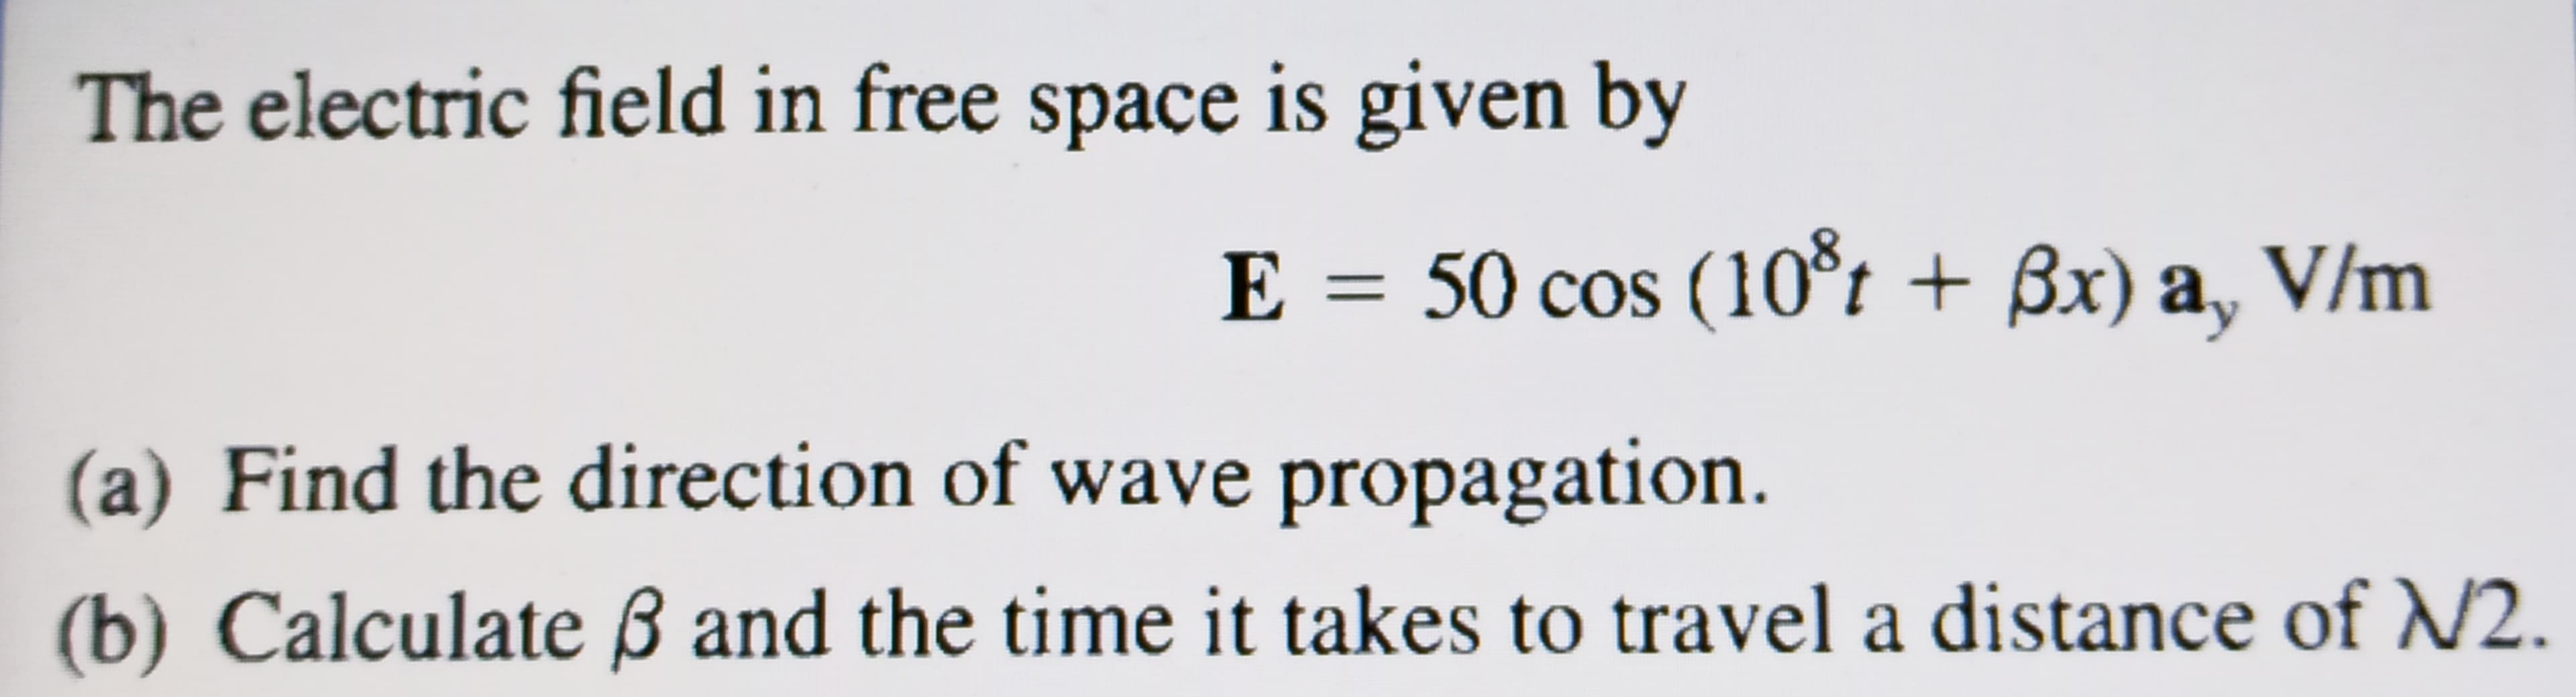 The electric field in free space is given by
E = 50 cos (1o*t + ßx) a, V/m
(a) Find the direction of wave propagation.
(b) Calculate ß and the time it takes to travel a distance of N2.
